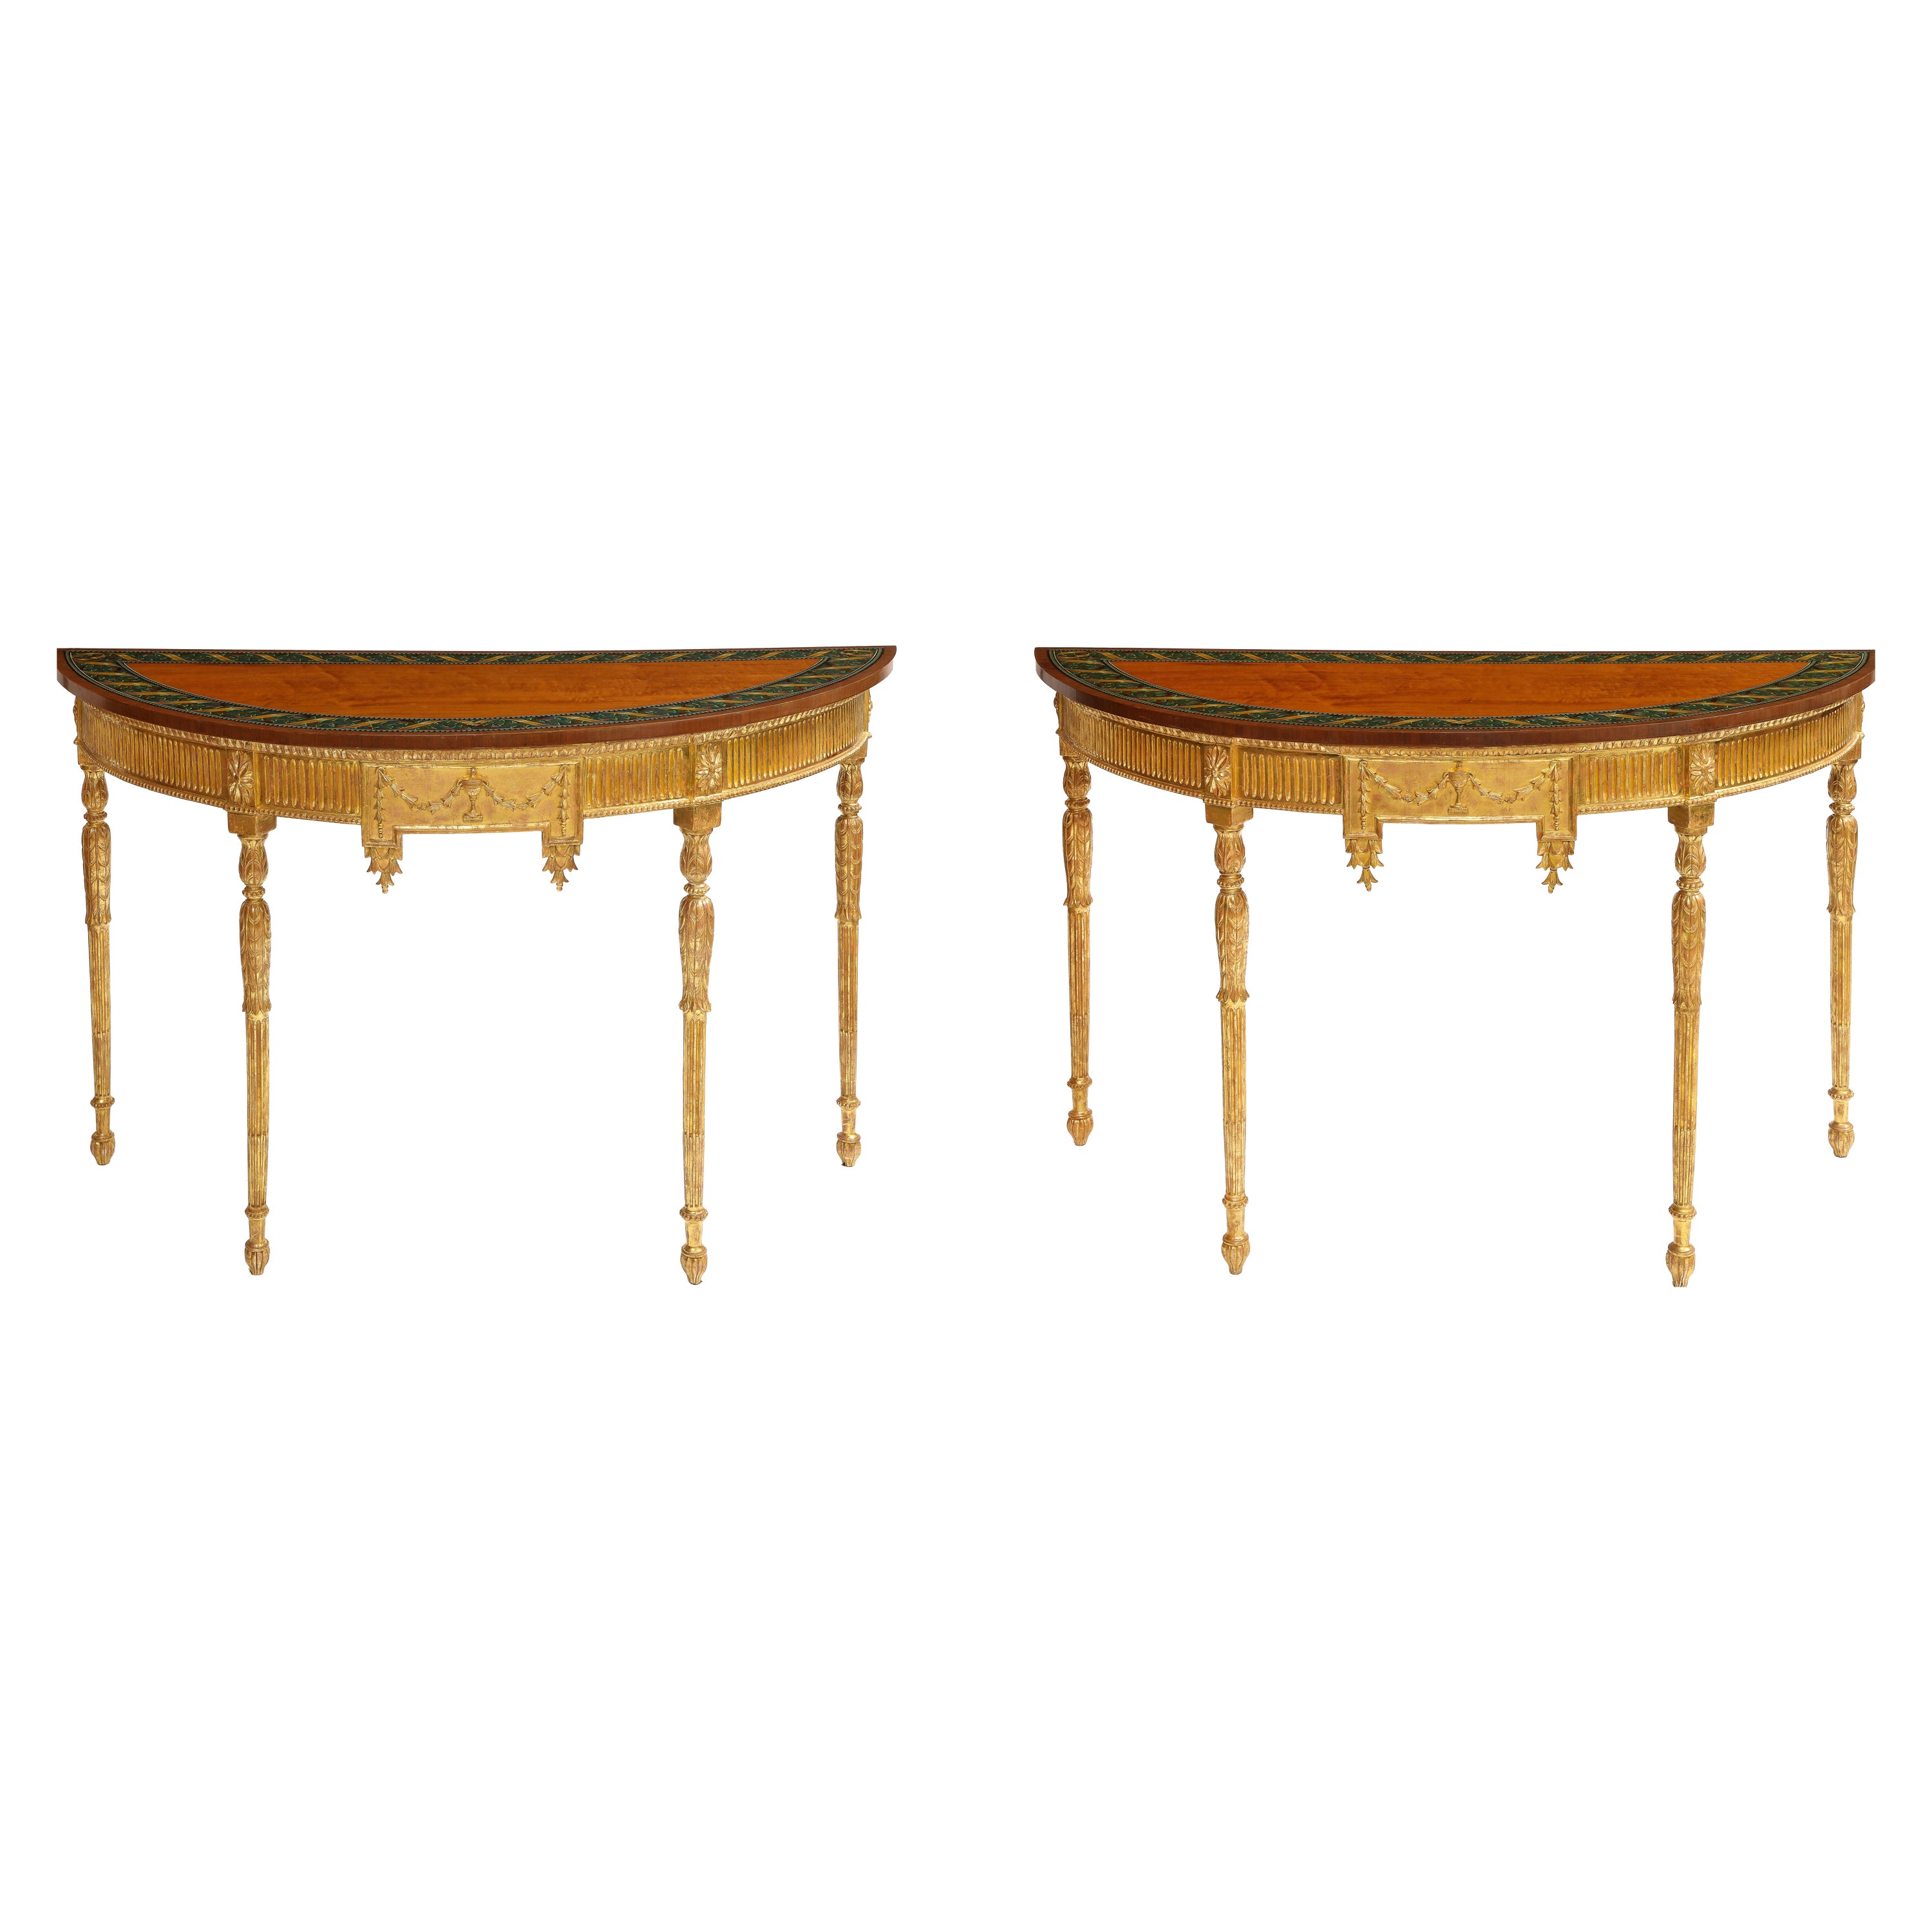 A Pair of 18th C. George III Gilt-Wood Demi-lune Consoles tables w/ Painted Tops For Sale